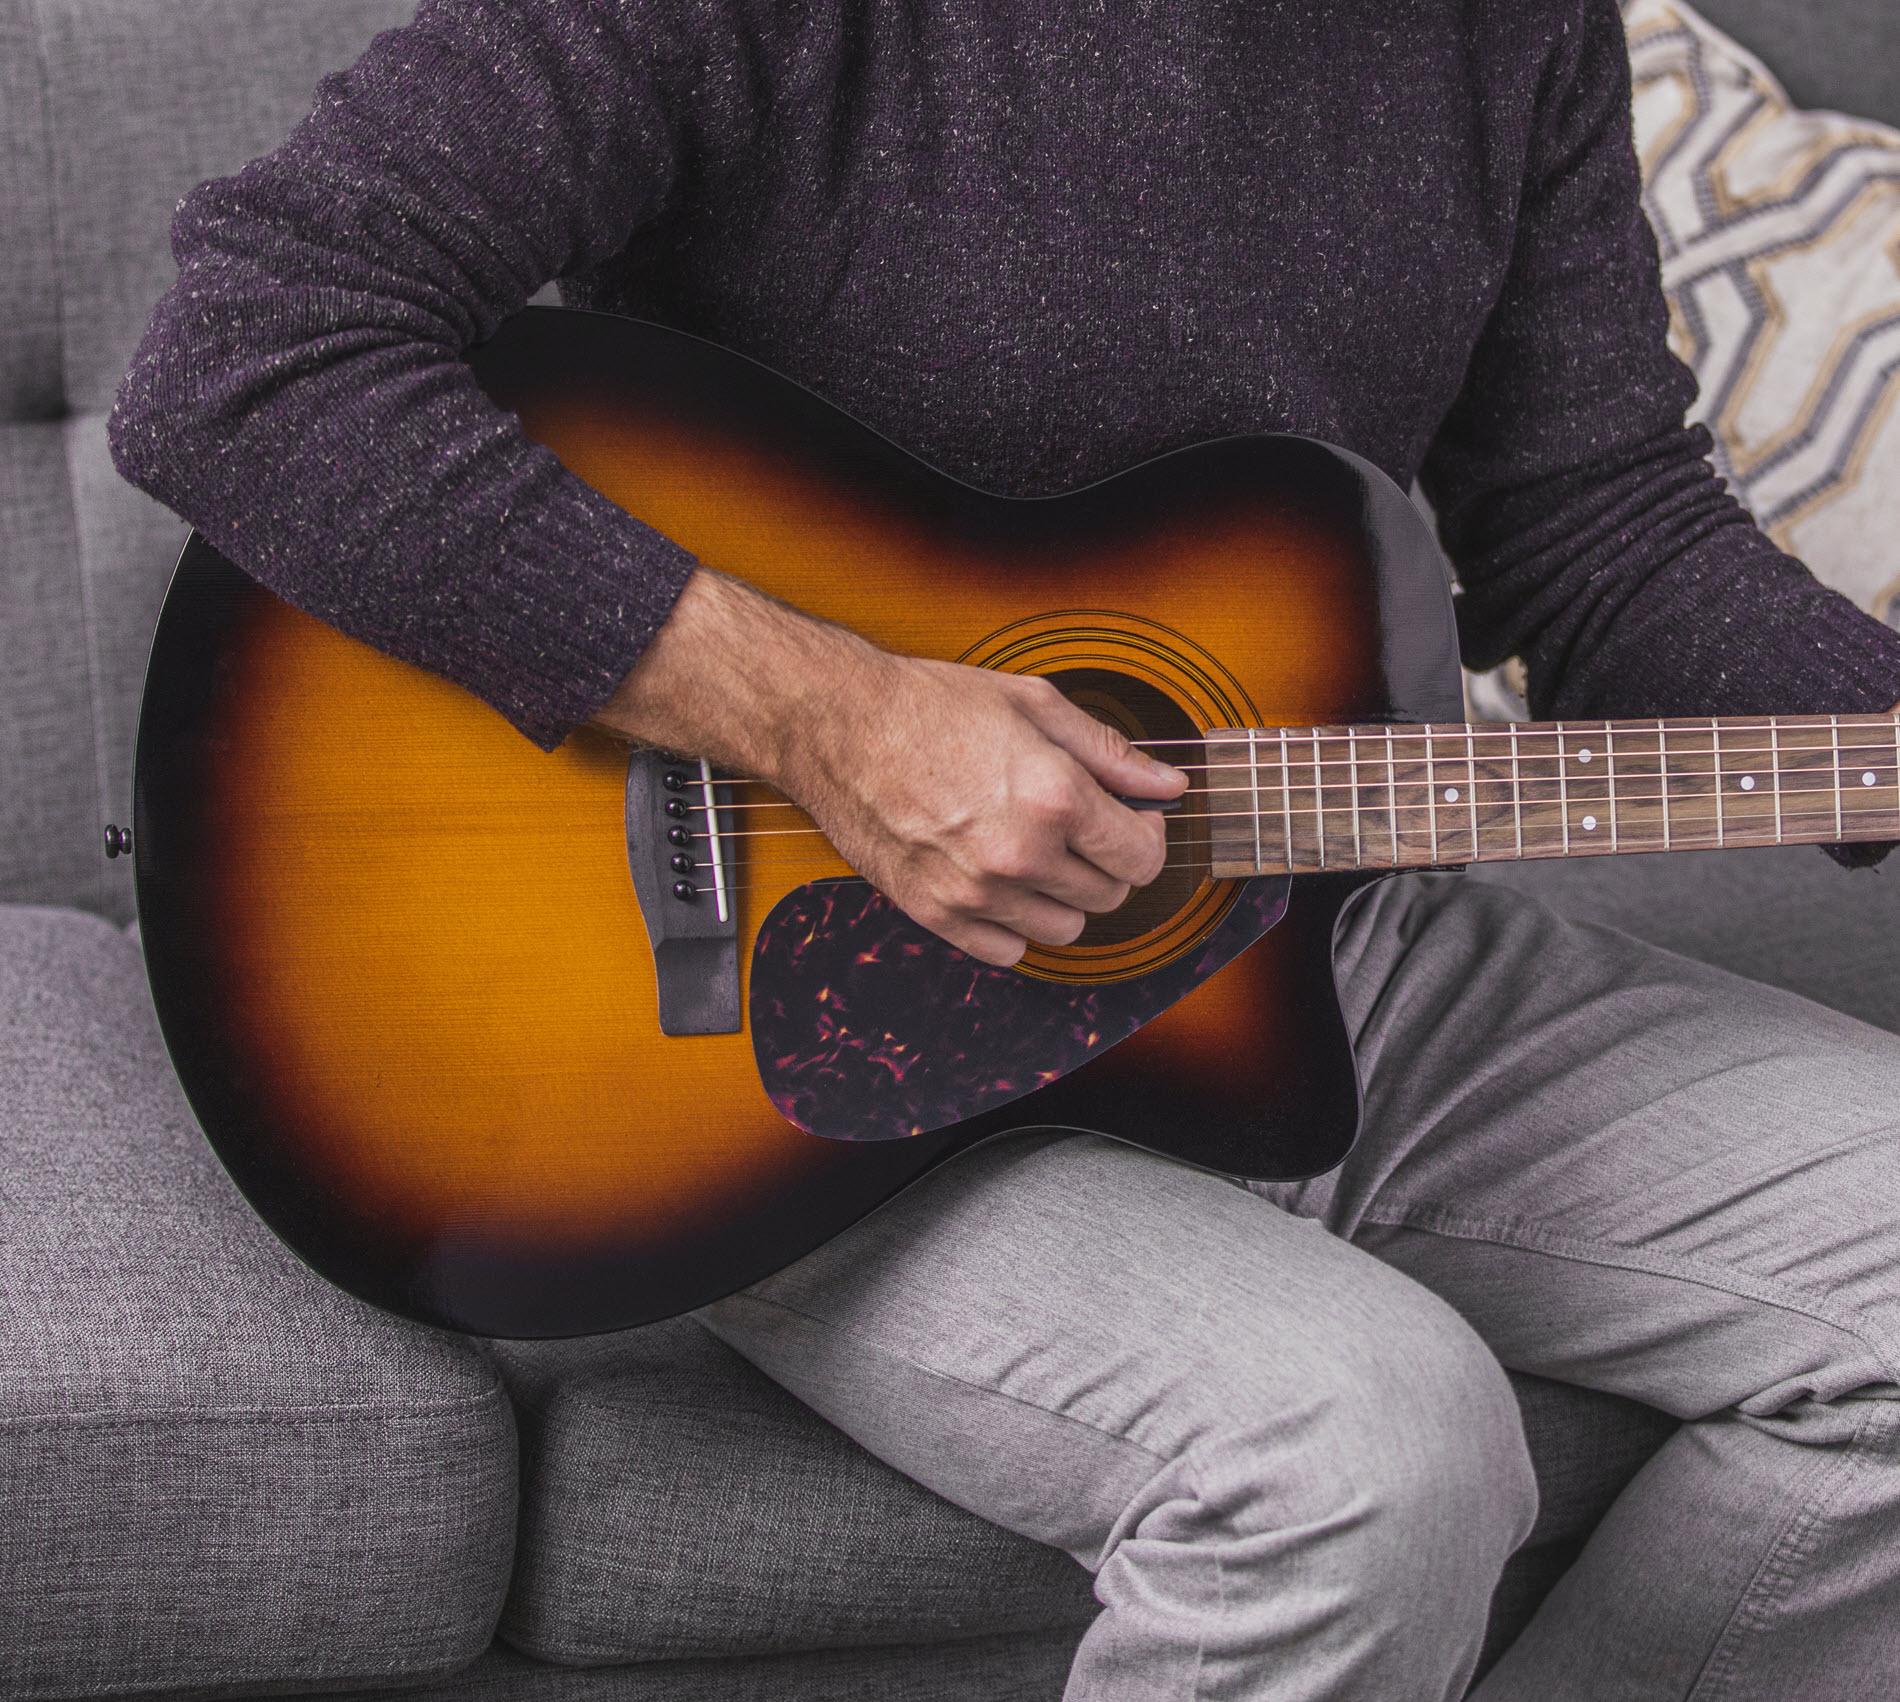 Closeup of someone seated on a couch playing an acoustic guitar.